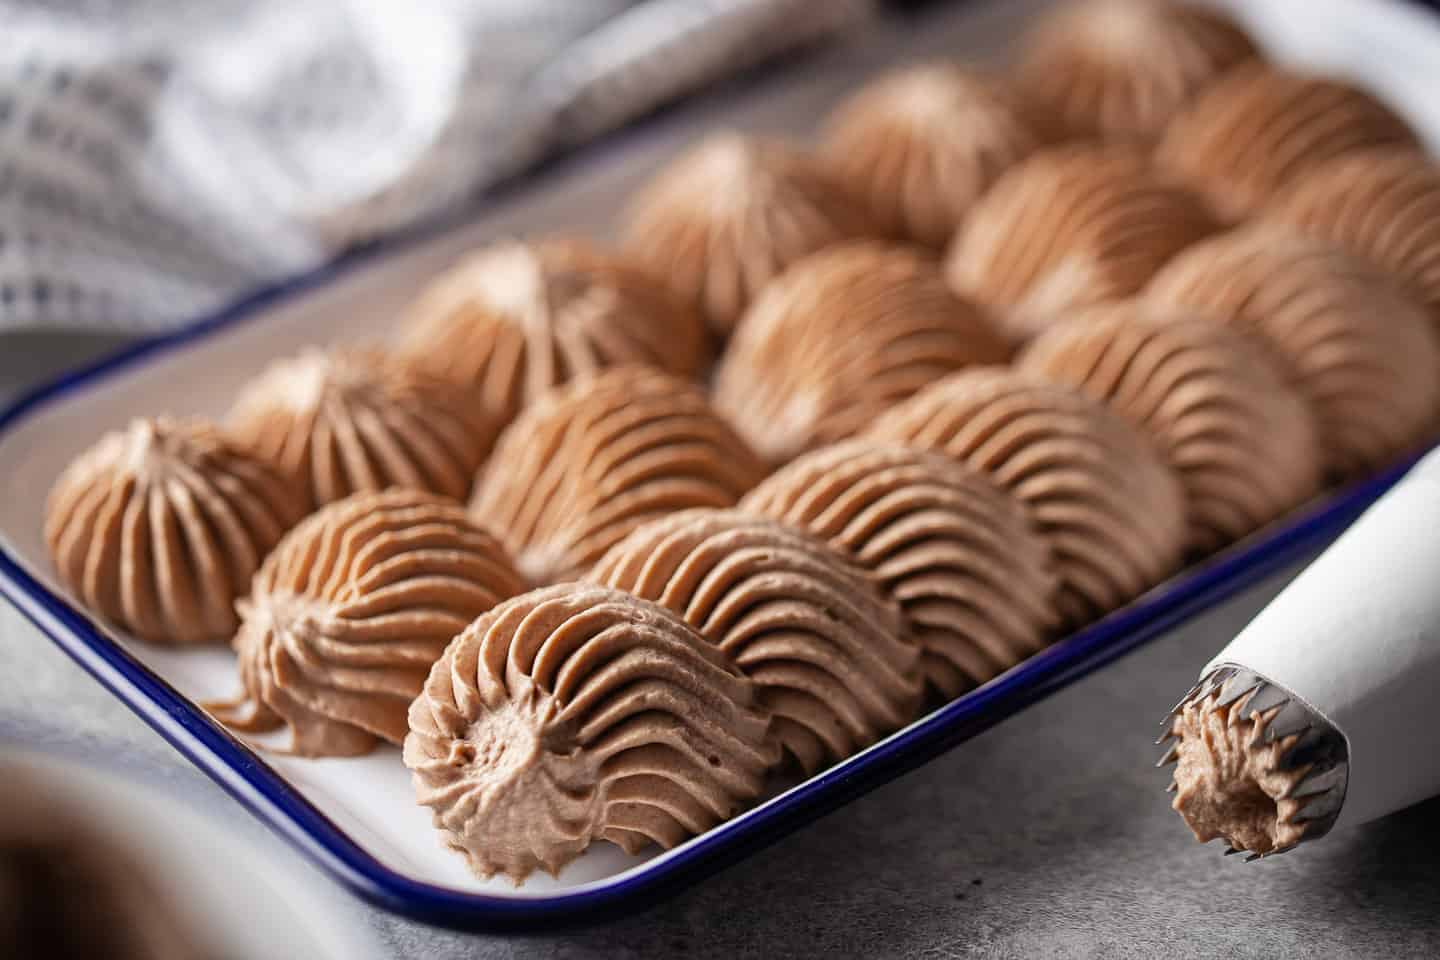 Chocolate icing using whipping cream, prepared and piped onto a tray with a French star tip.